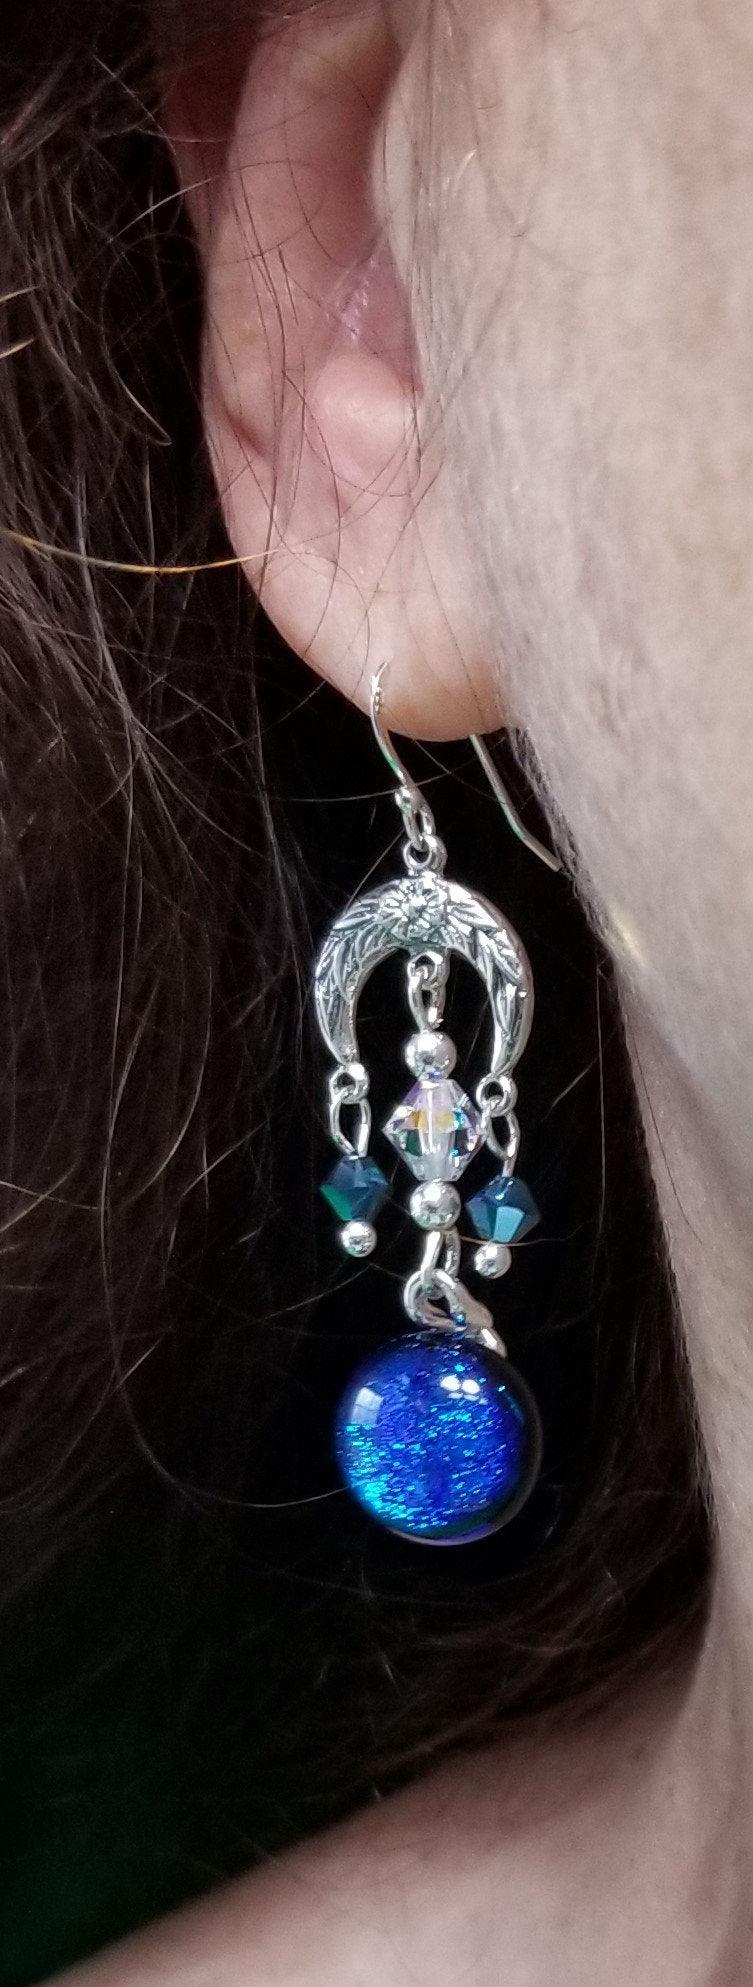 Blue Floral Crescent pireced earrings. Blue dichroic fused glass with Swarovski crystals & sterling silver